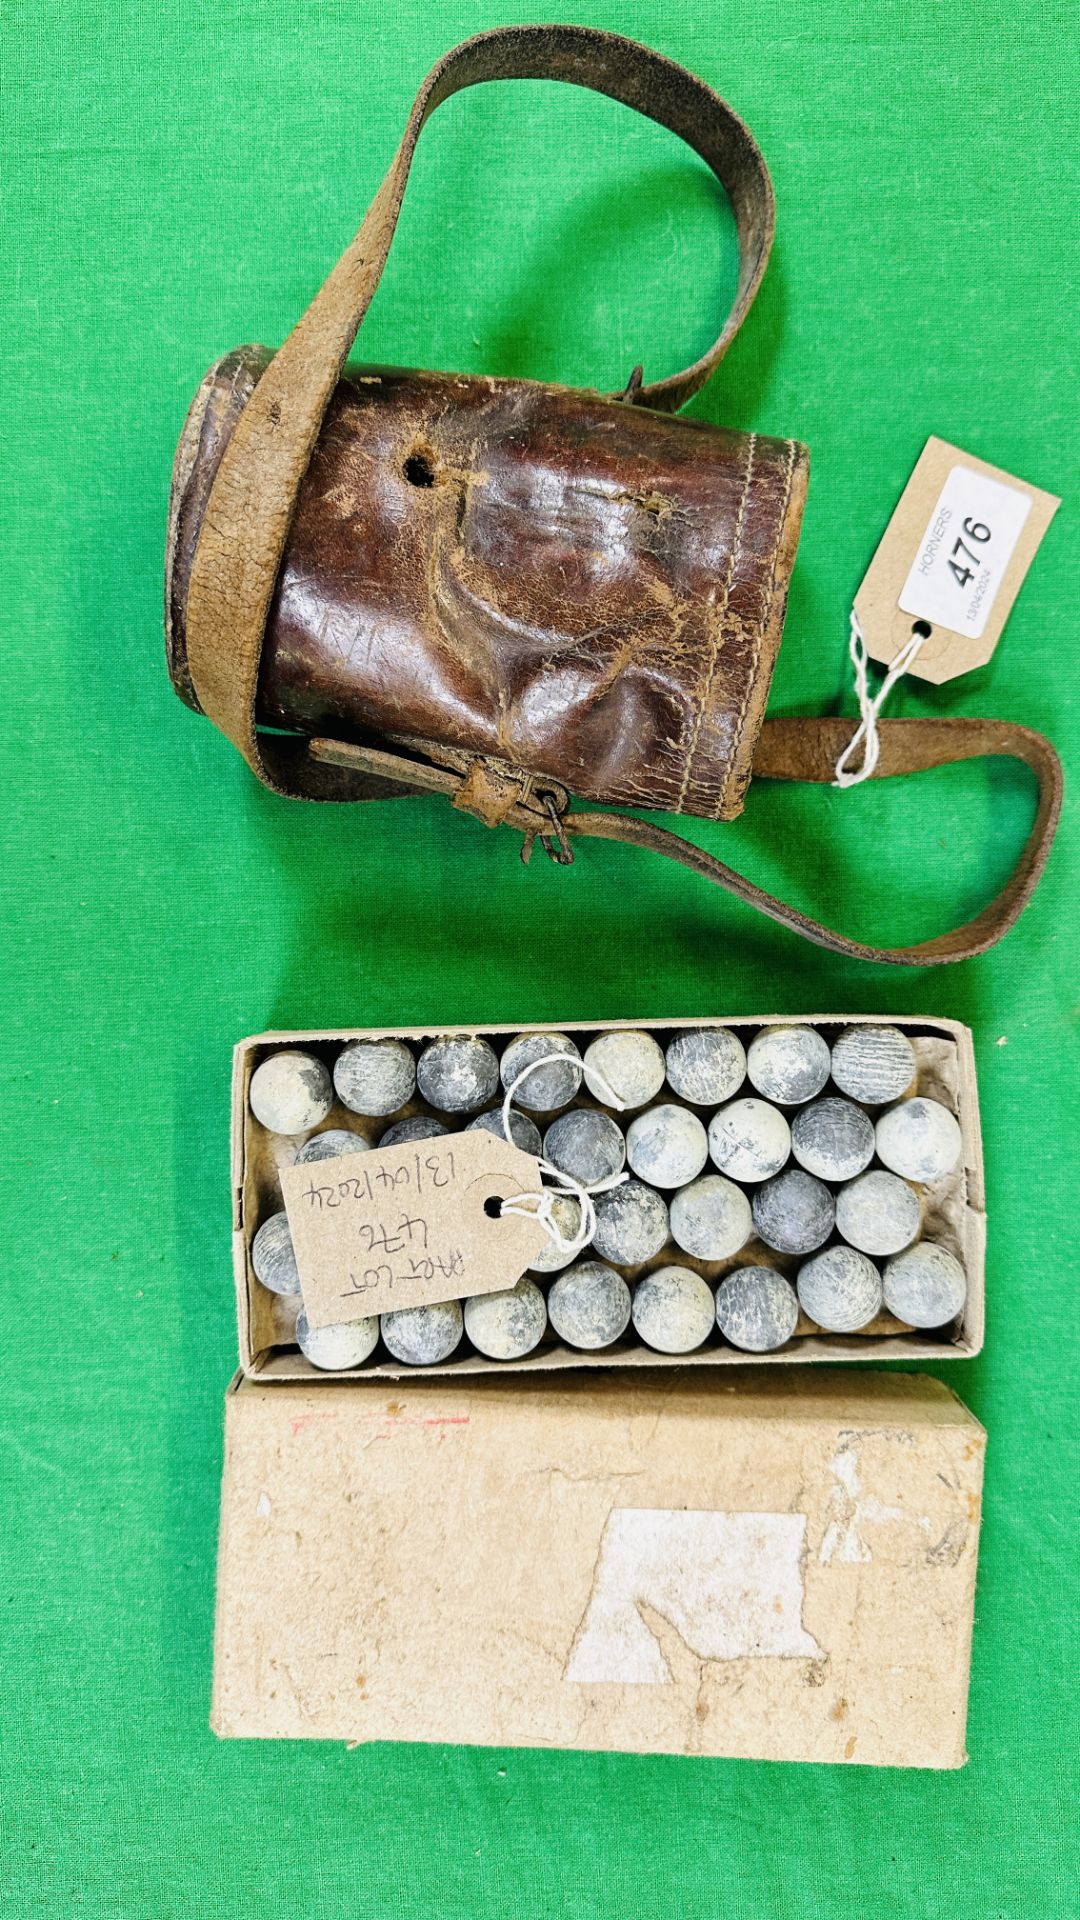 A BOX CONTAINING LEAD MUSKET BALLS AND VINTAGE LEATHER POUCH.